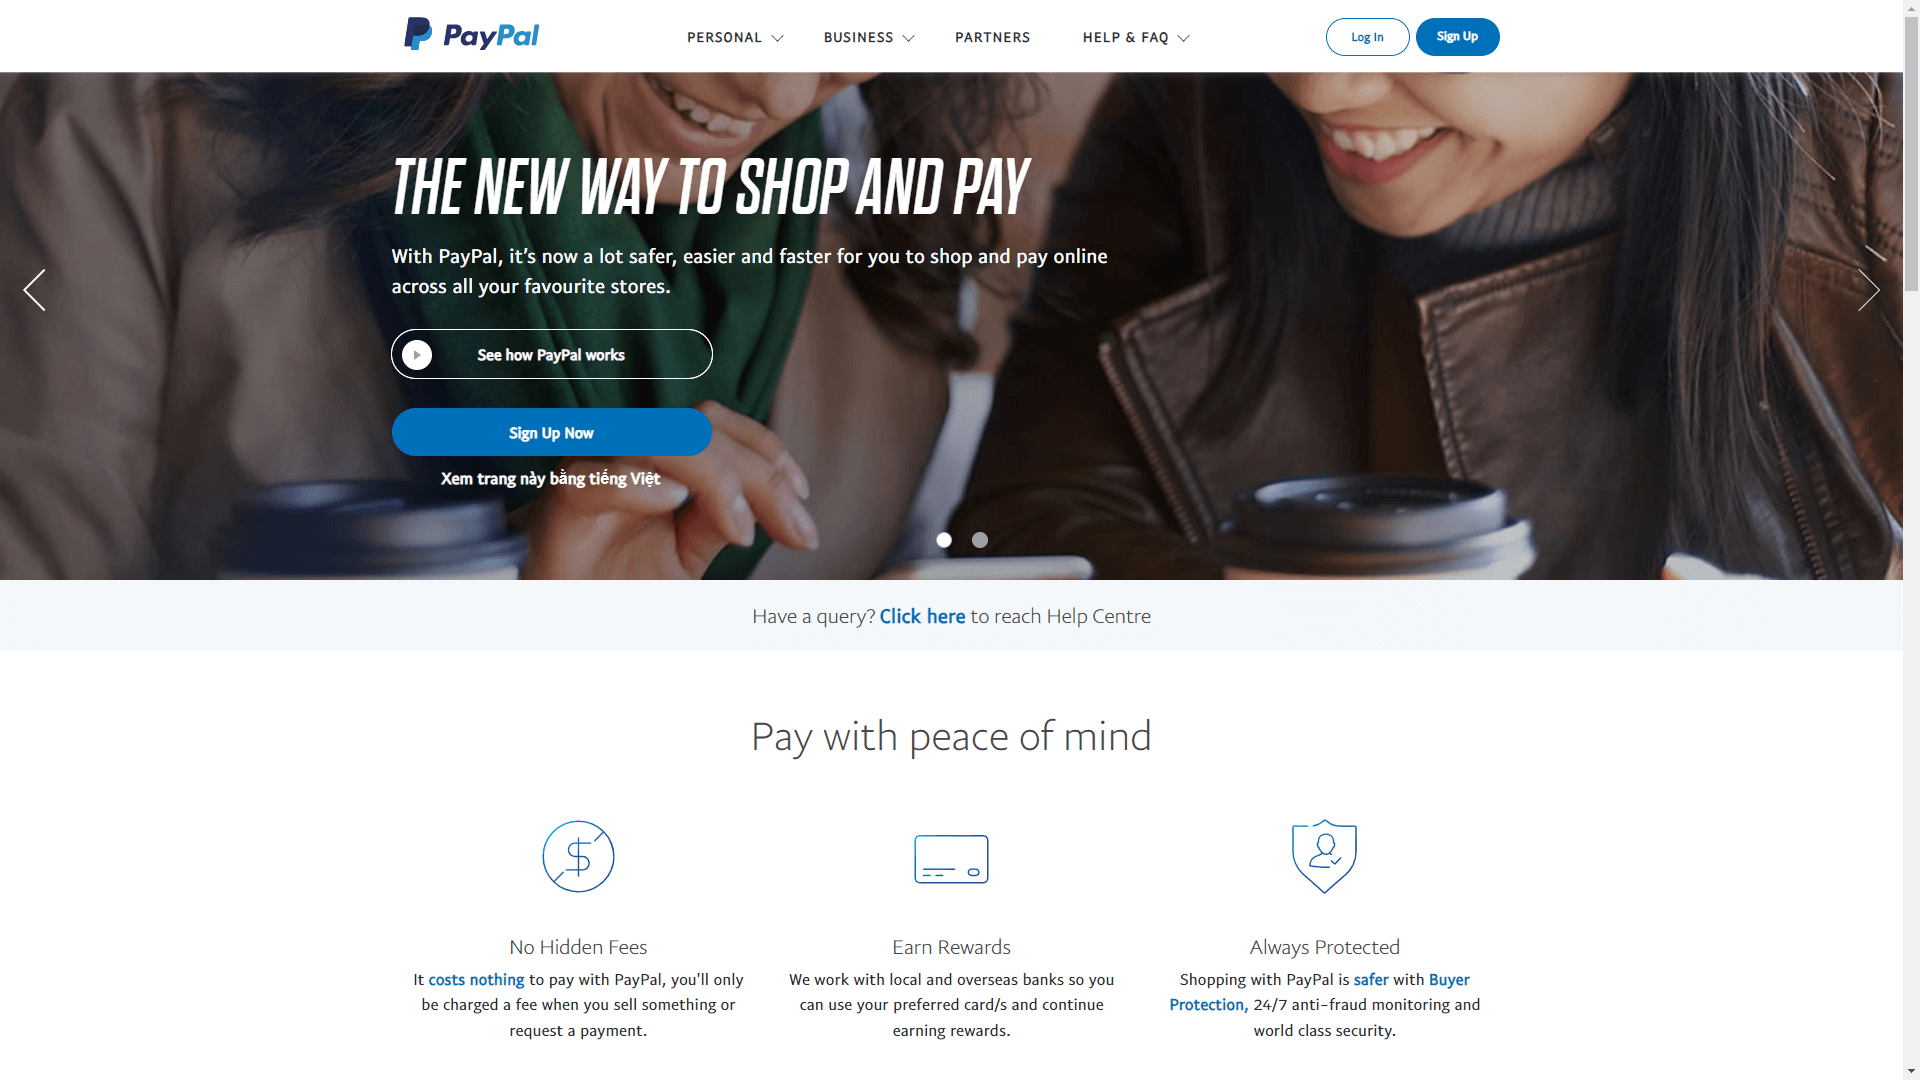 Step-by-step instructions on integrating international payment gateways and implementing currency